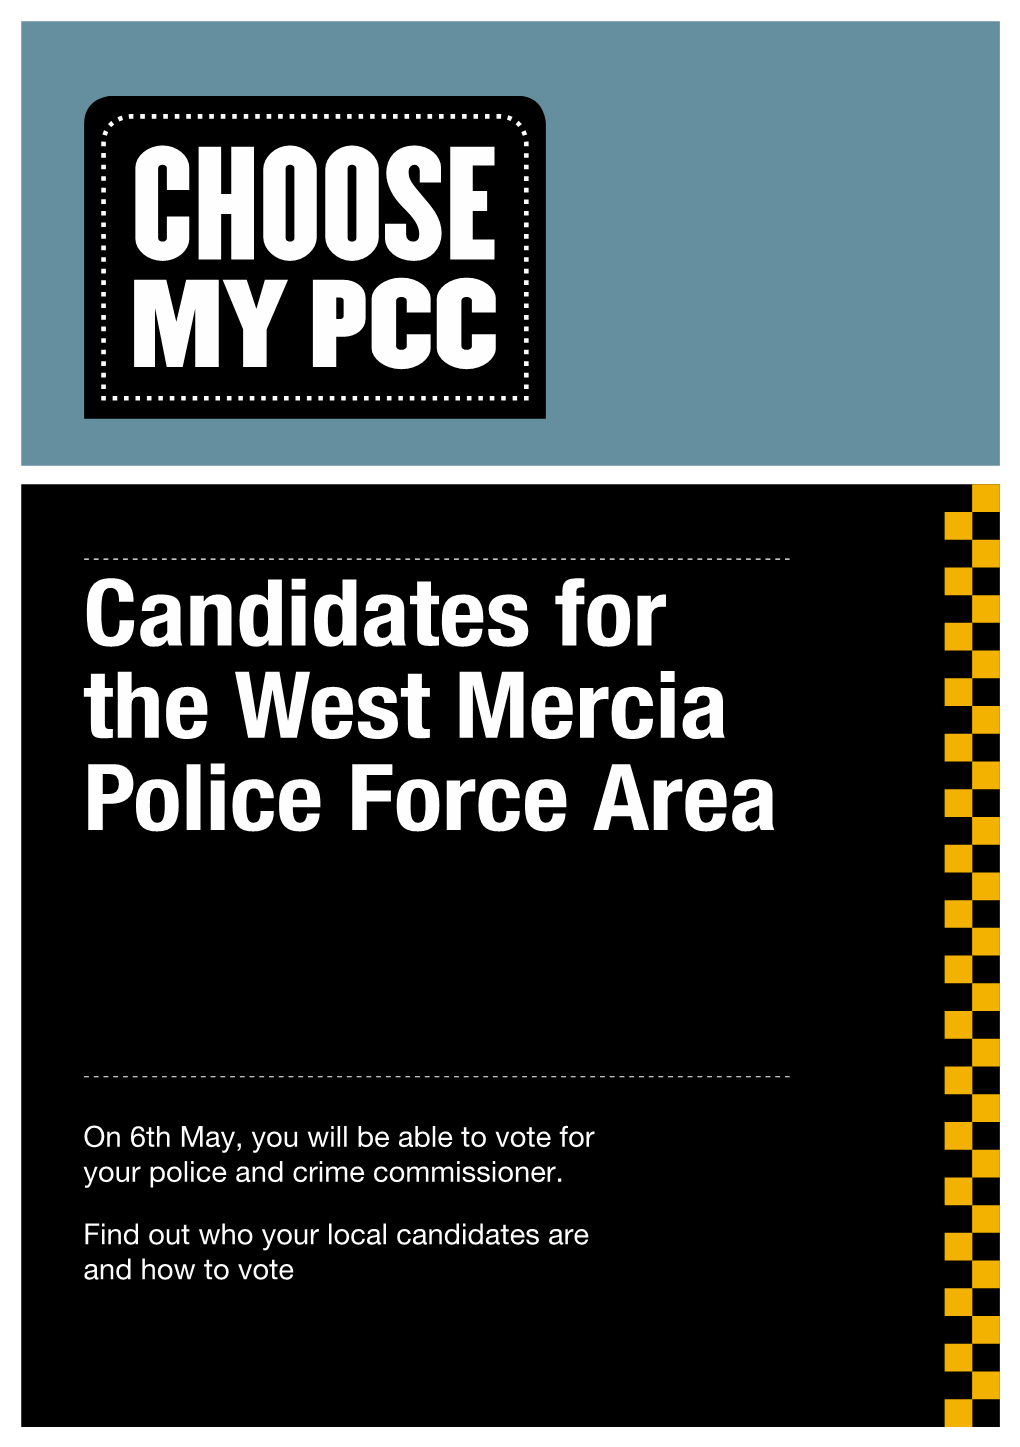 Candidates for the West Mercia Police Force Area